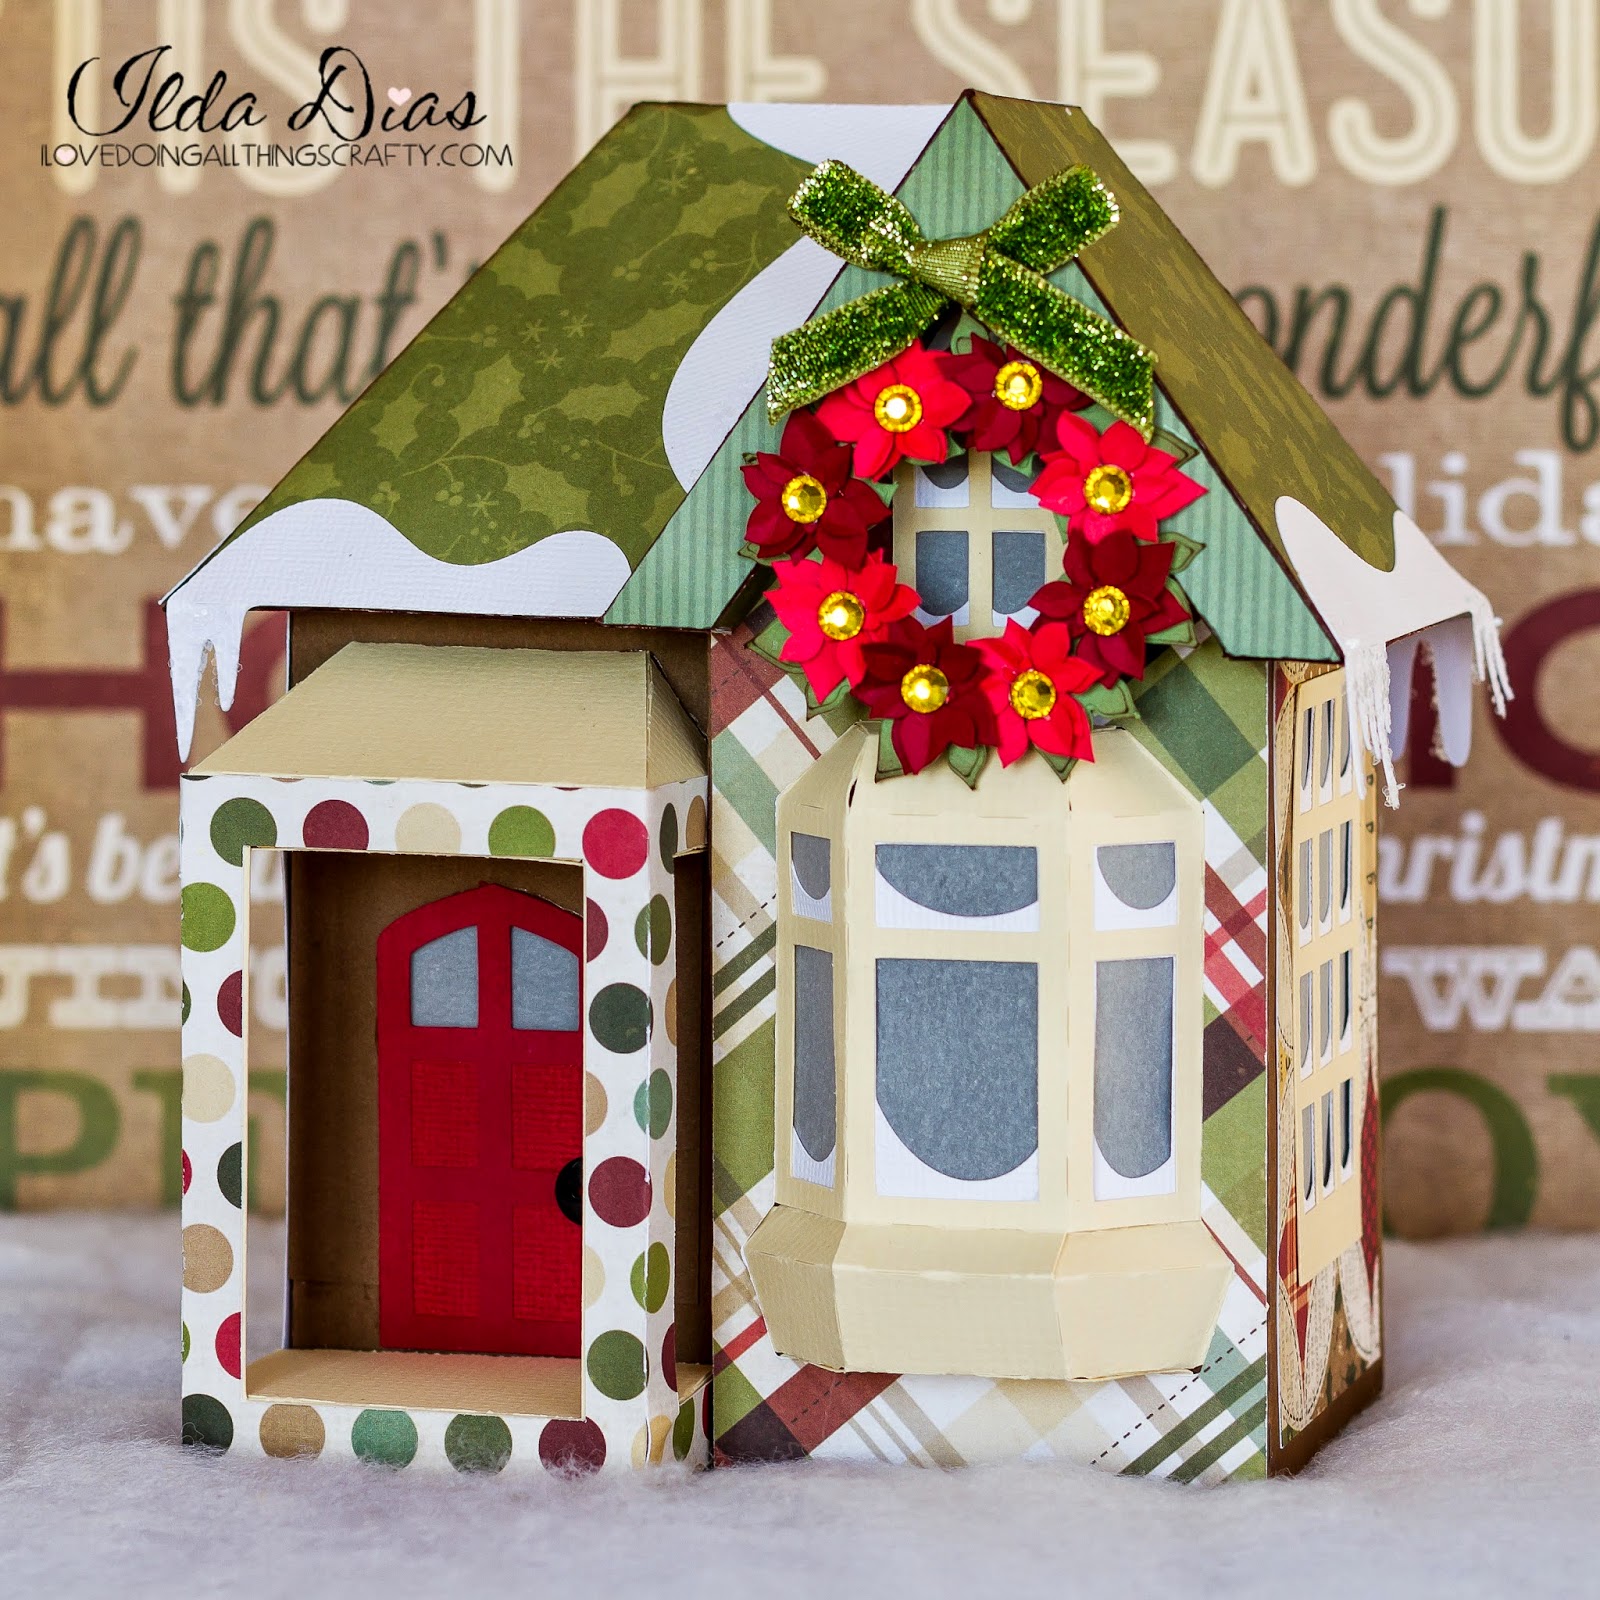 Download I Love Doing All Things Crafty: 3D Snowy House Box